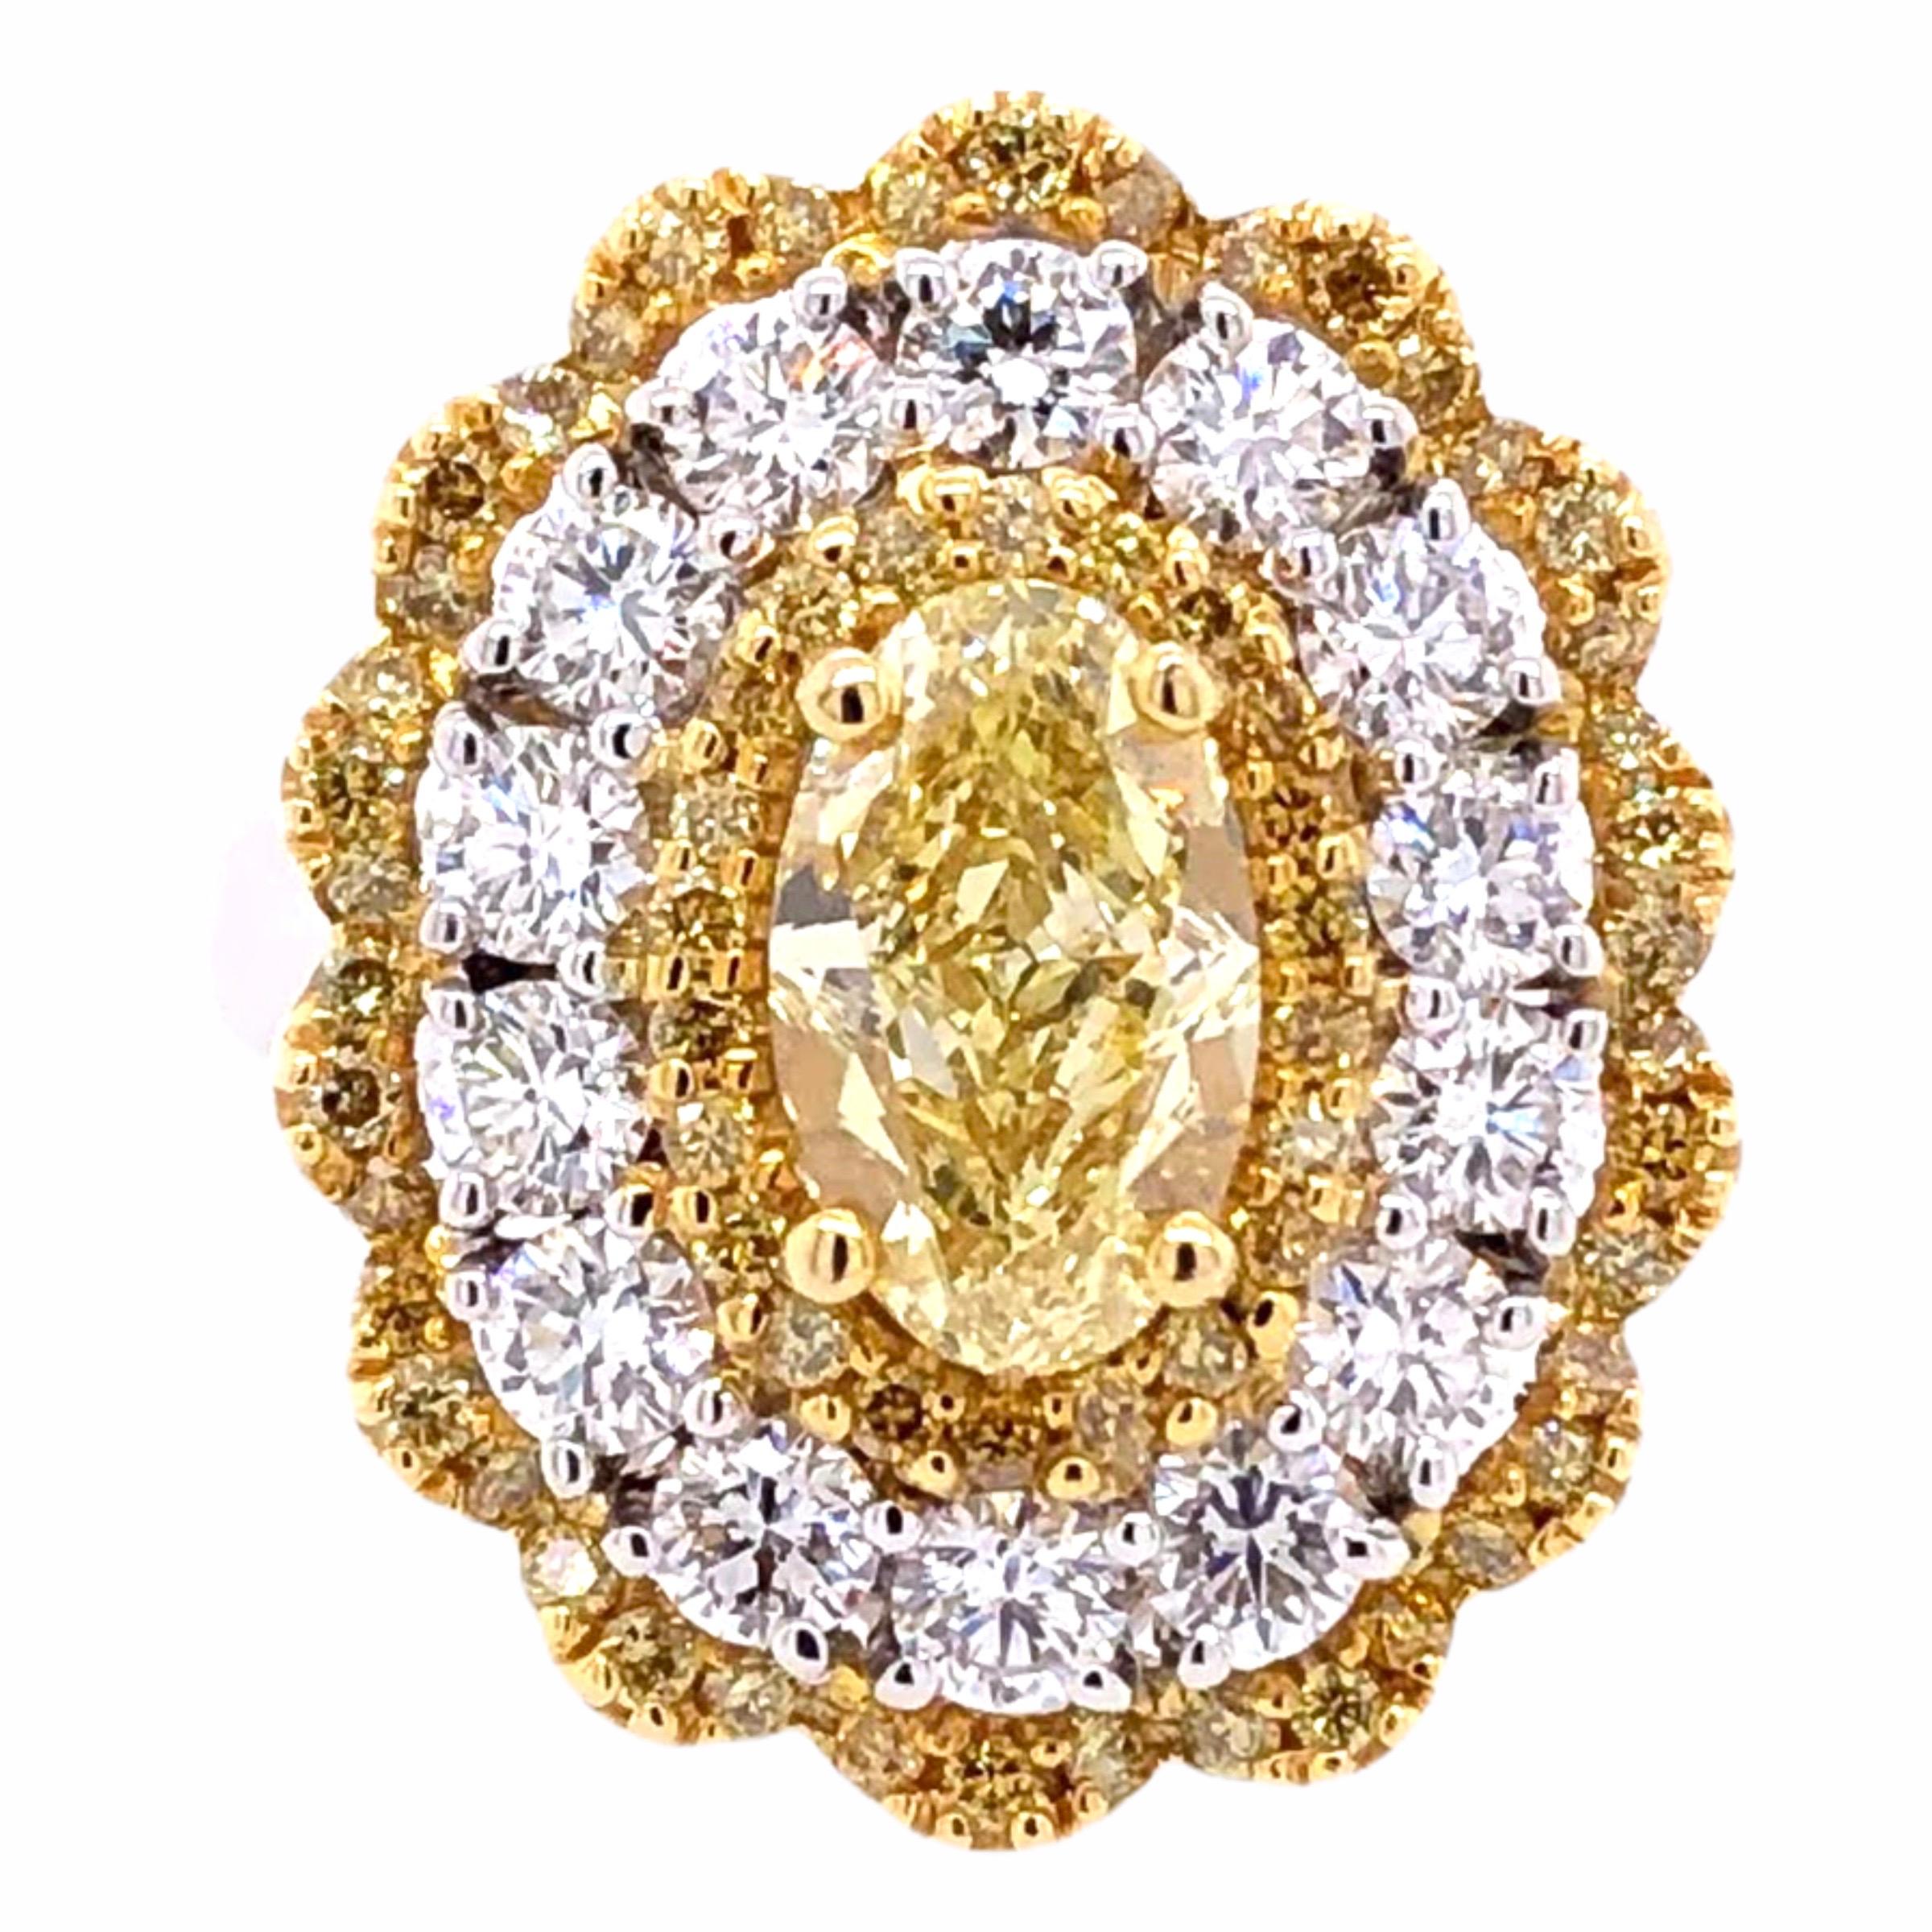 PARIS Craft House 1.32ct Fancy Yellow Diamond Cocktail Ring in 18K White/Yellow Gold. This ring and its stones are detachable and could convert into a beautiful pendant. *Chain not included*

- 1 Oval-cut Fancy Yellow Diamond/1.32ct
- 64 Round